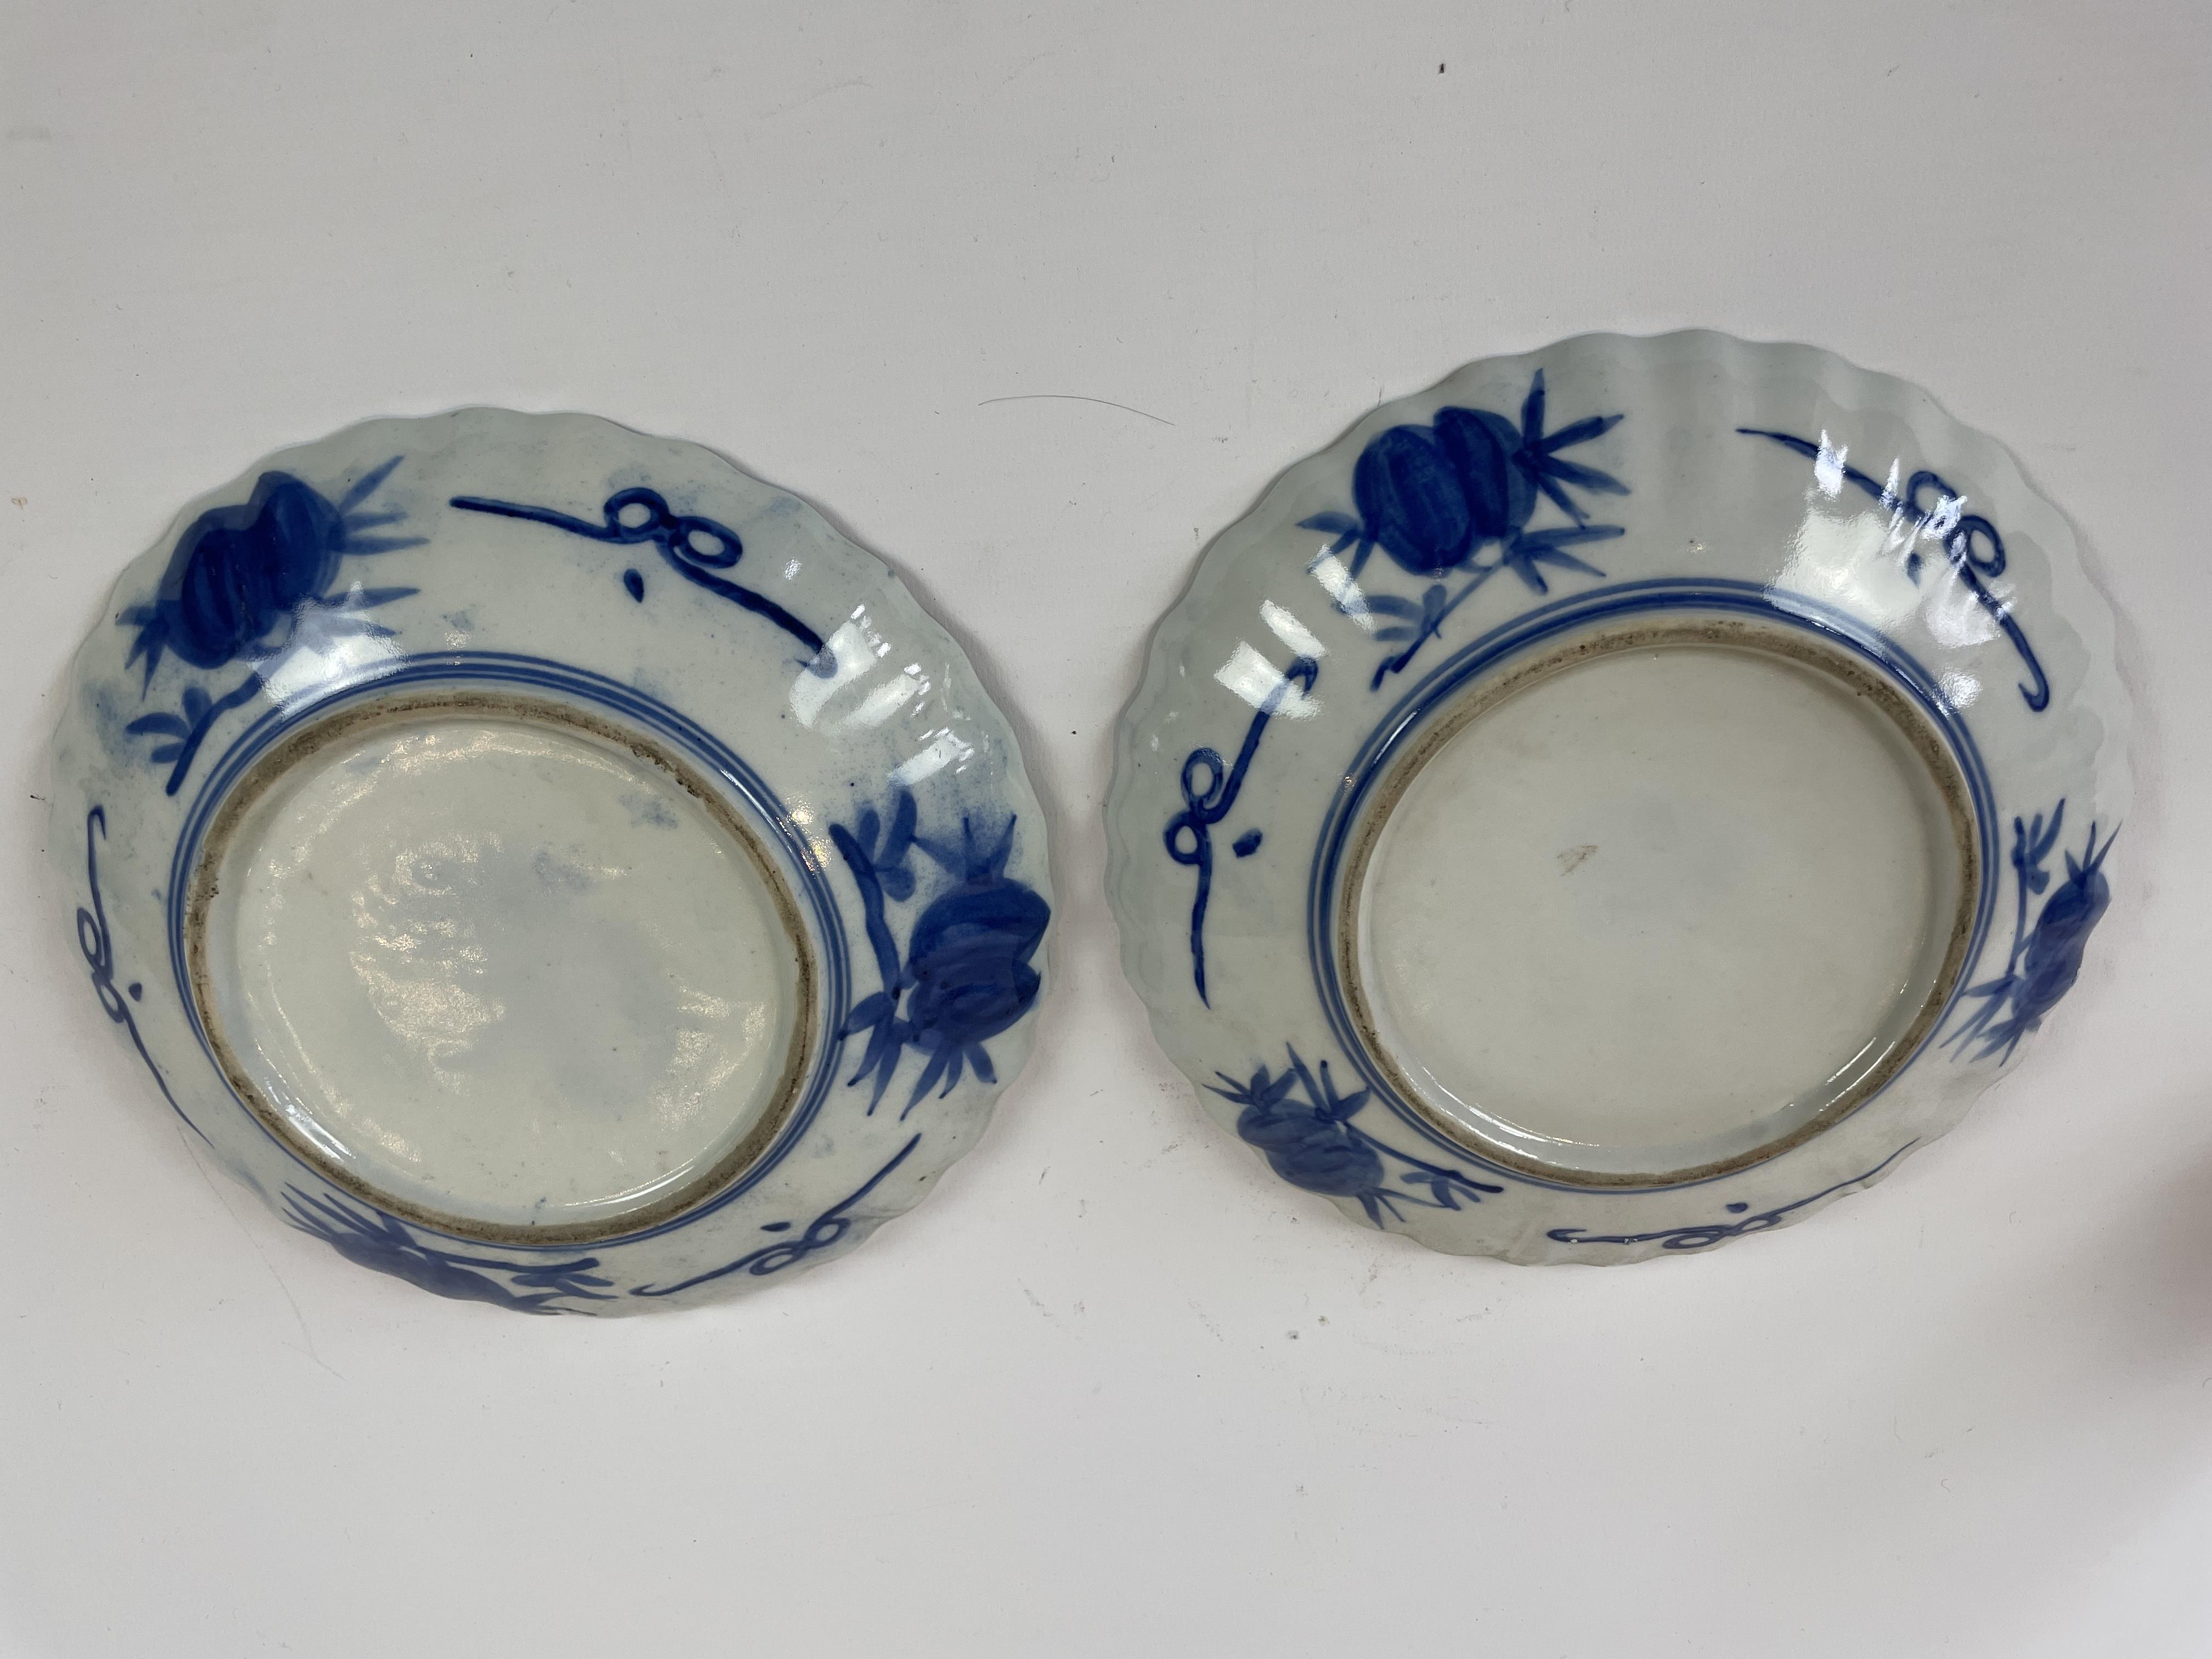 2 Imari red, white and blue plates with floral central motif - Image 2 of 2